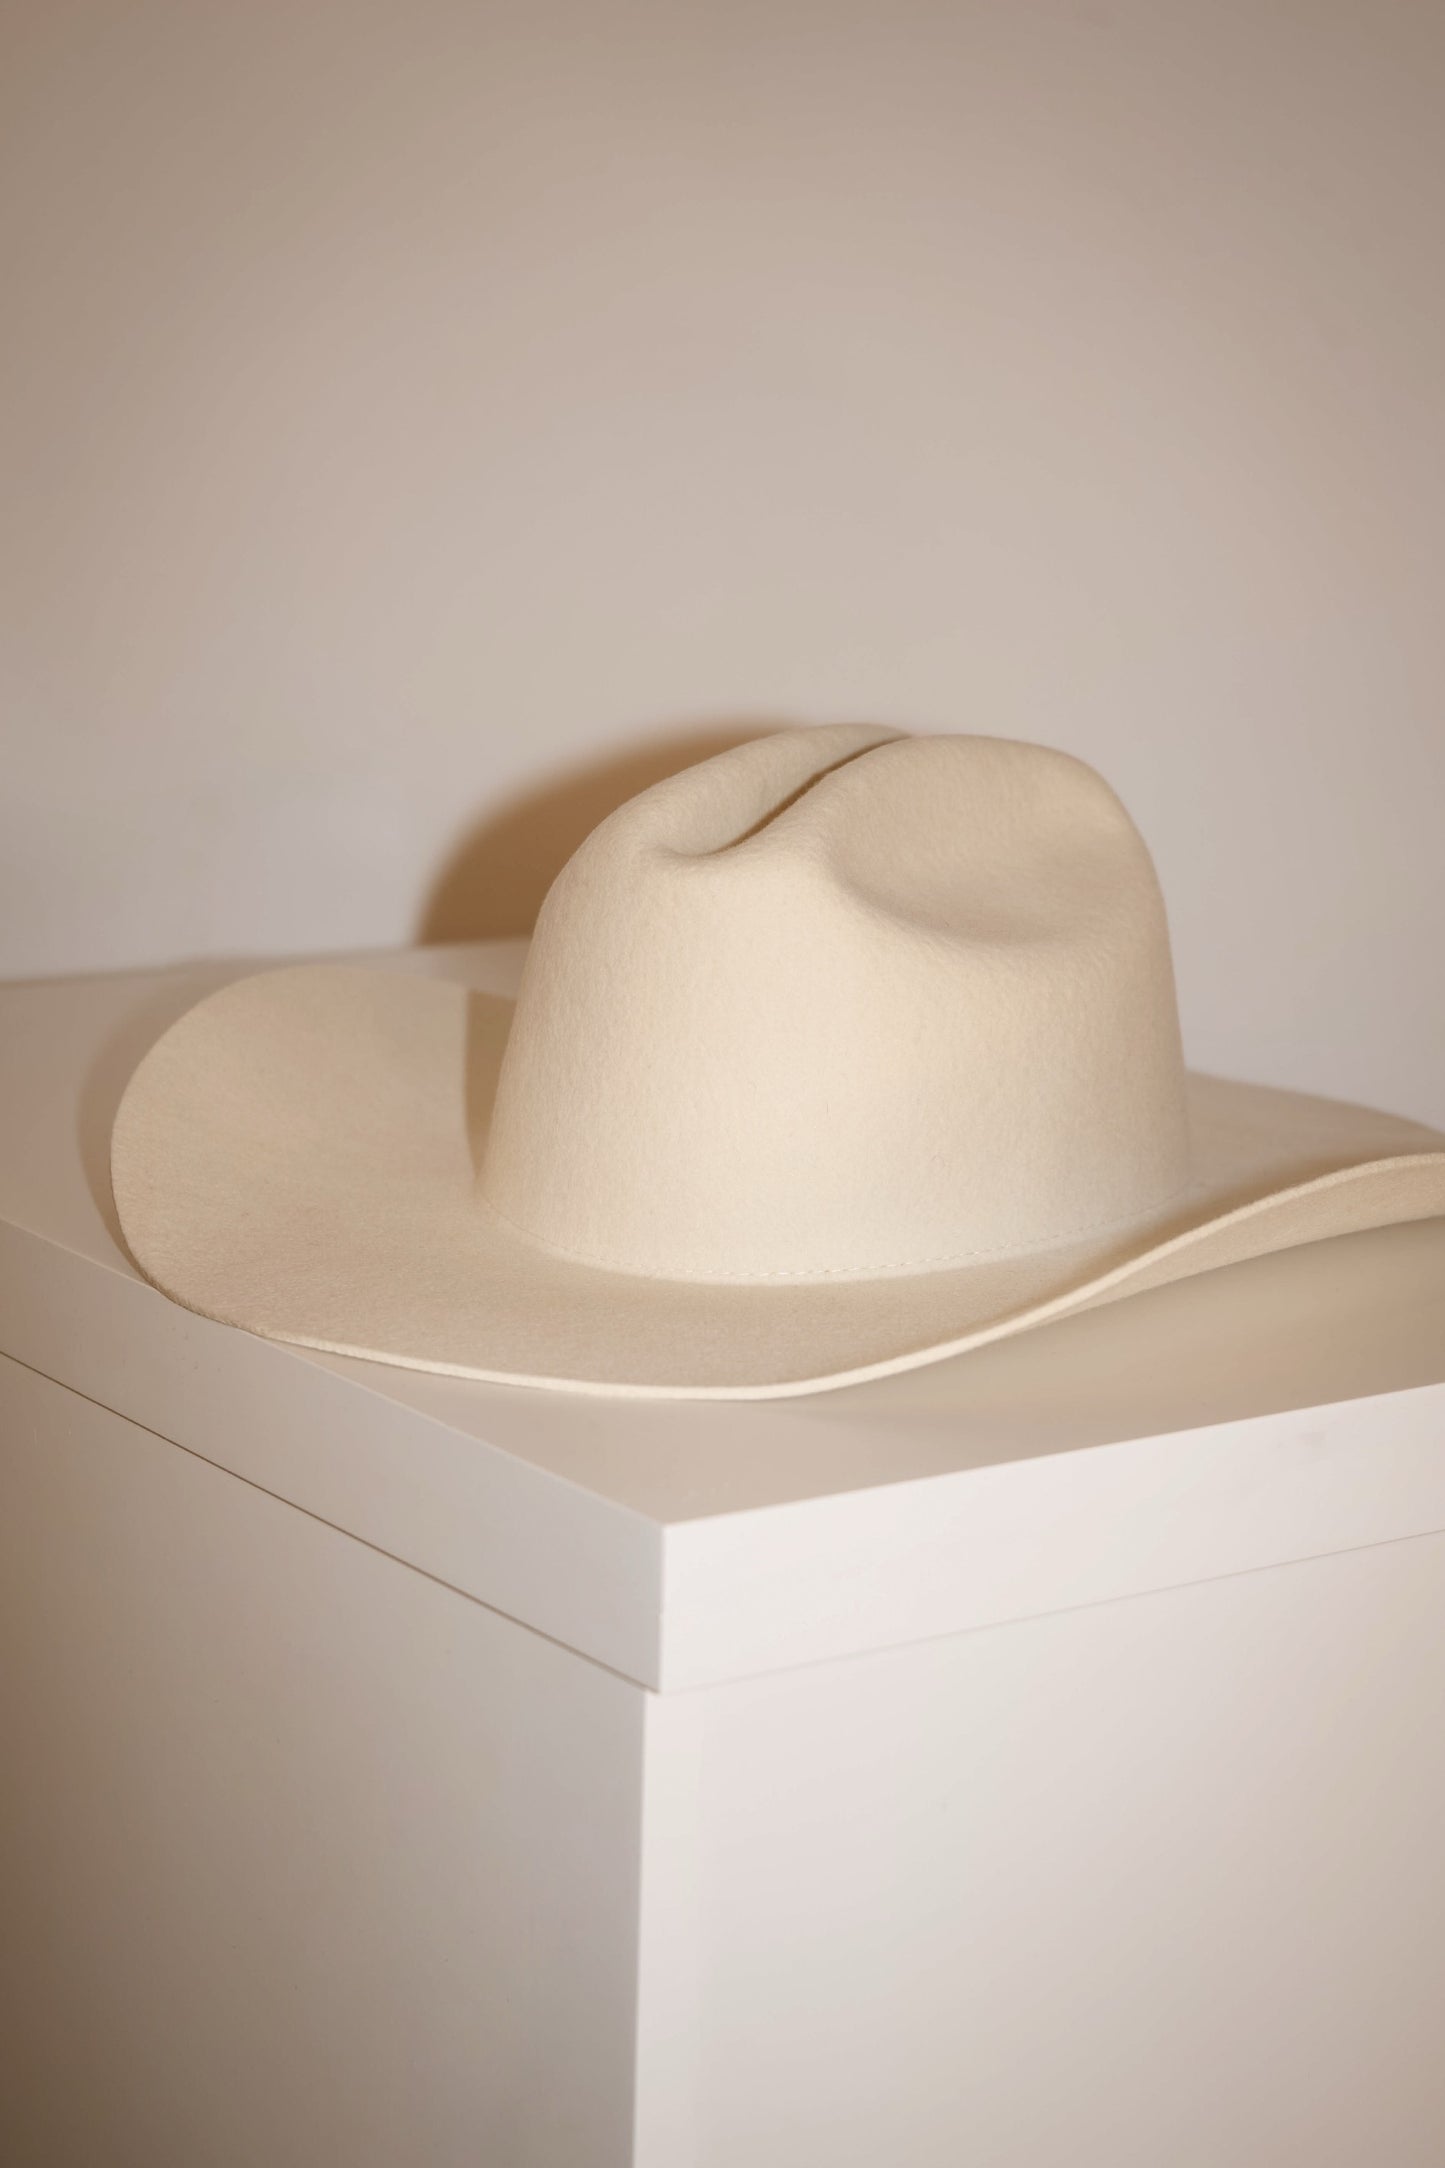 The Roundup Cowboy Hat